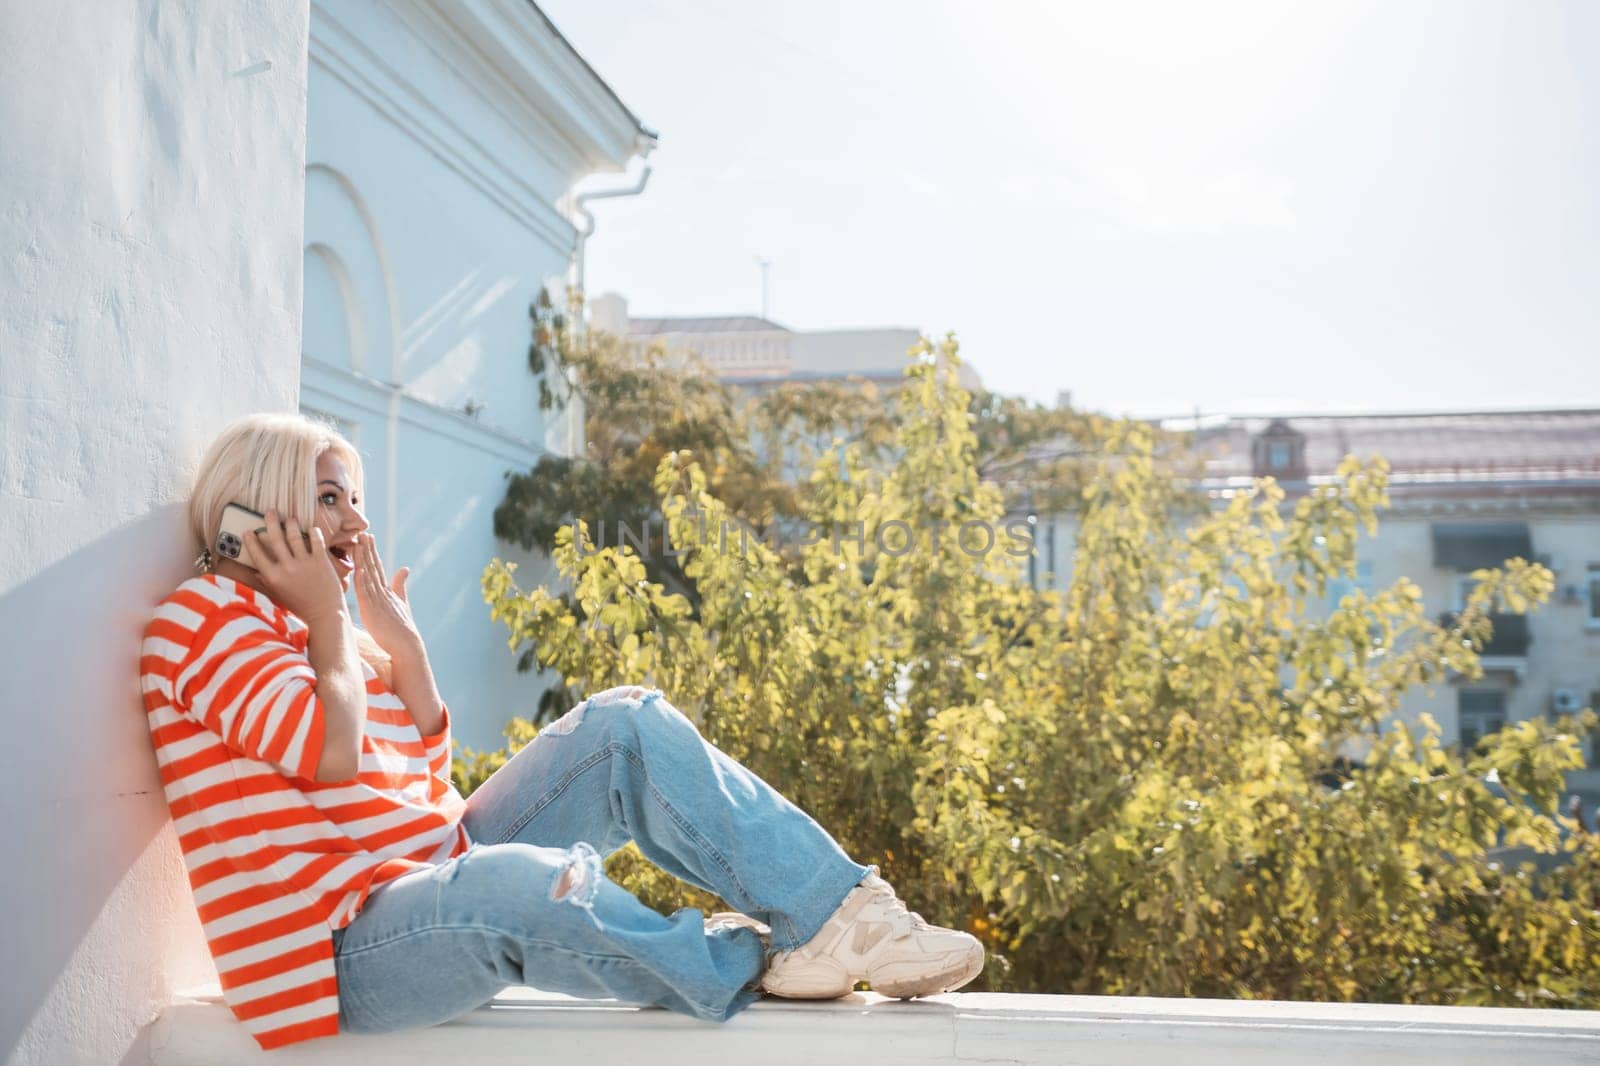 A woman is sitting on a ledge with her phone in her hand. She is wearing a striped shirt and blue jeans. The scene is set in a city with a tree in the background